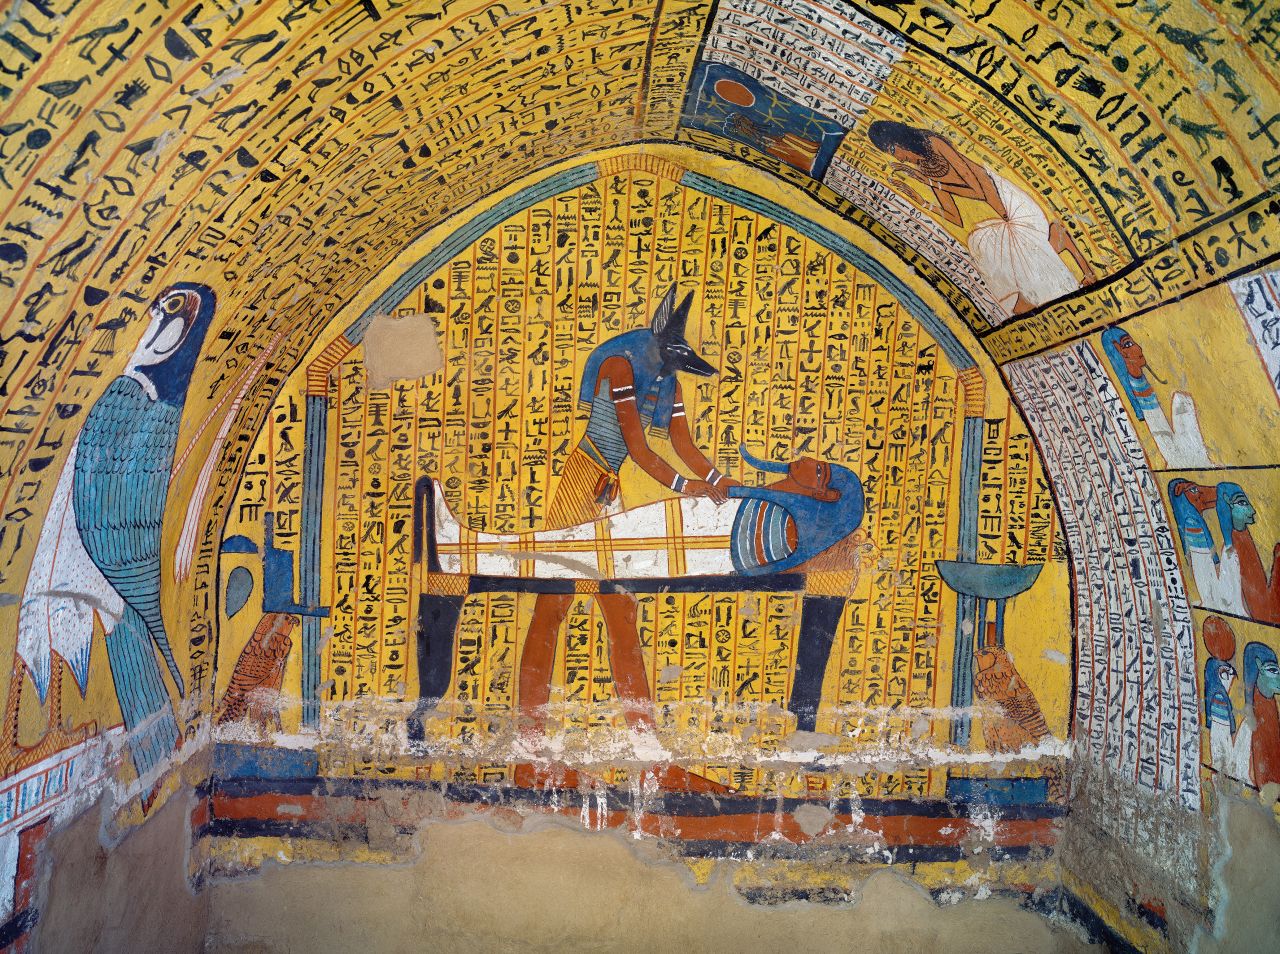 Vannini's photographs are featured in a new book, ""King Tut: The Journey Through the Underworld," that has been published to celebrate the centenary of Carter's first excavation in the Valley of Kings. 